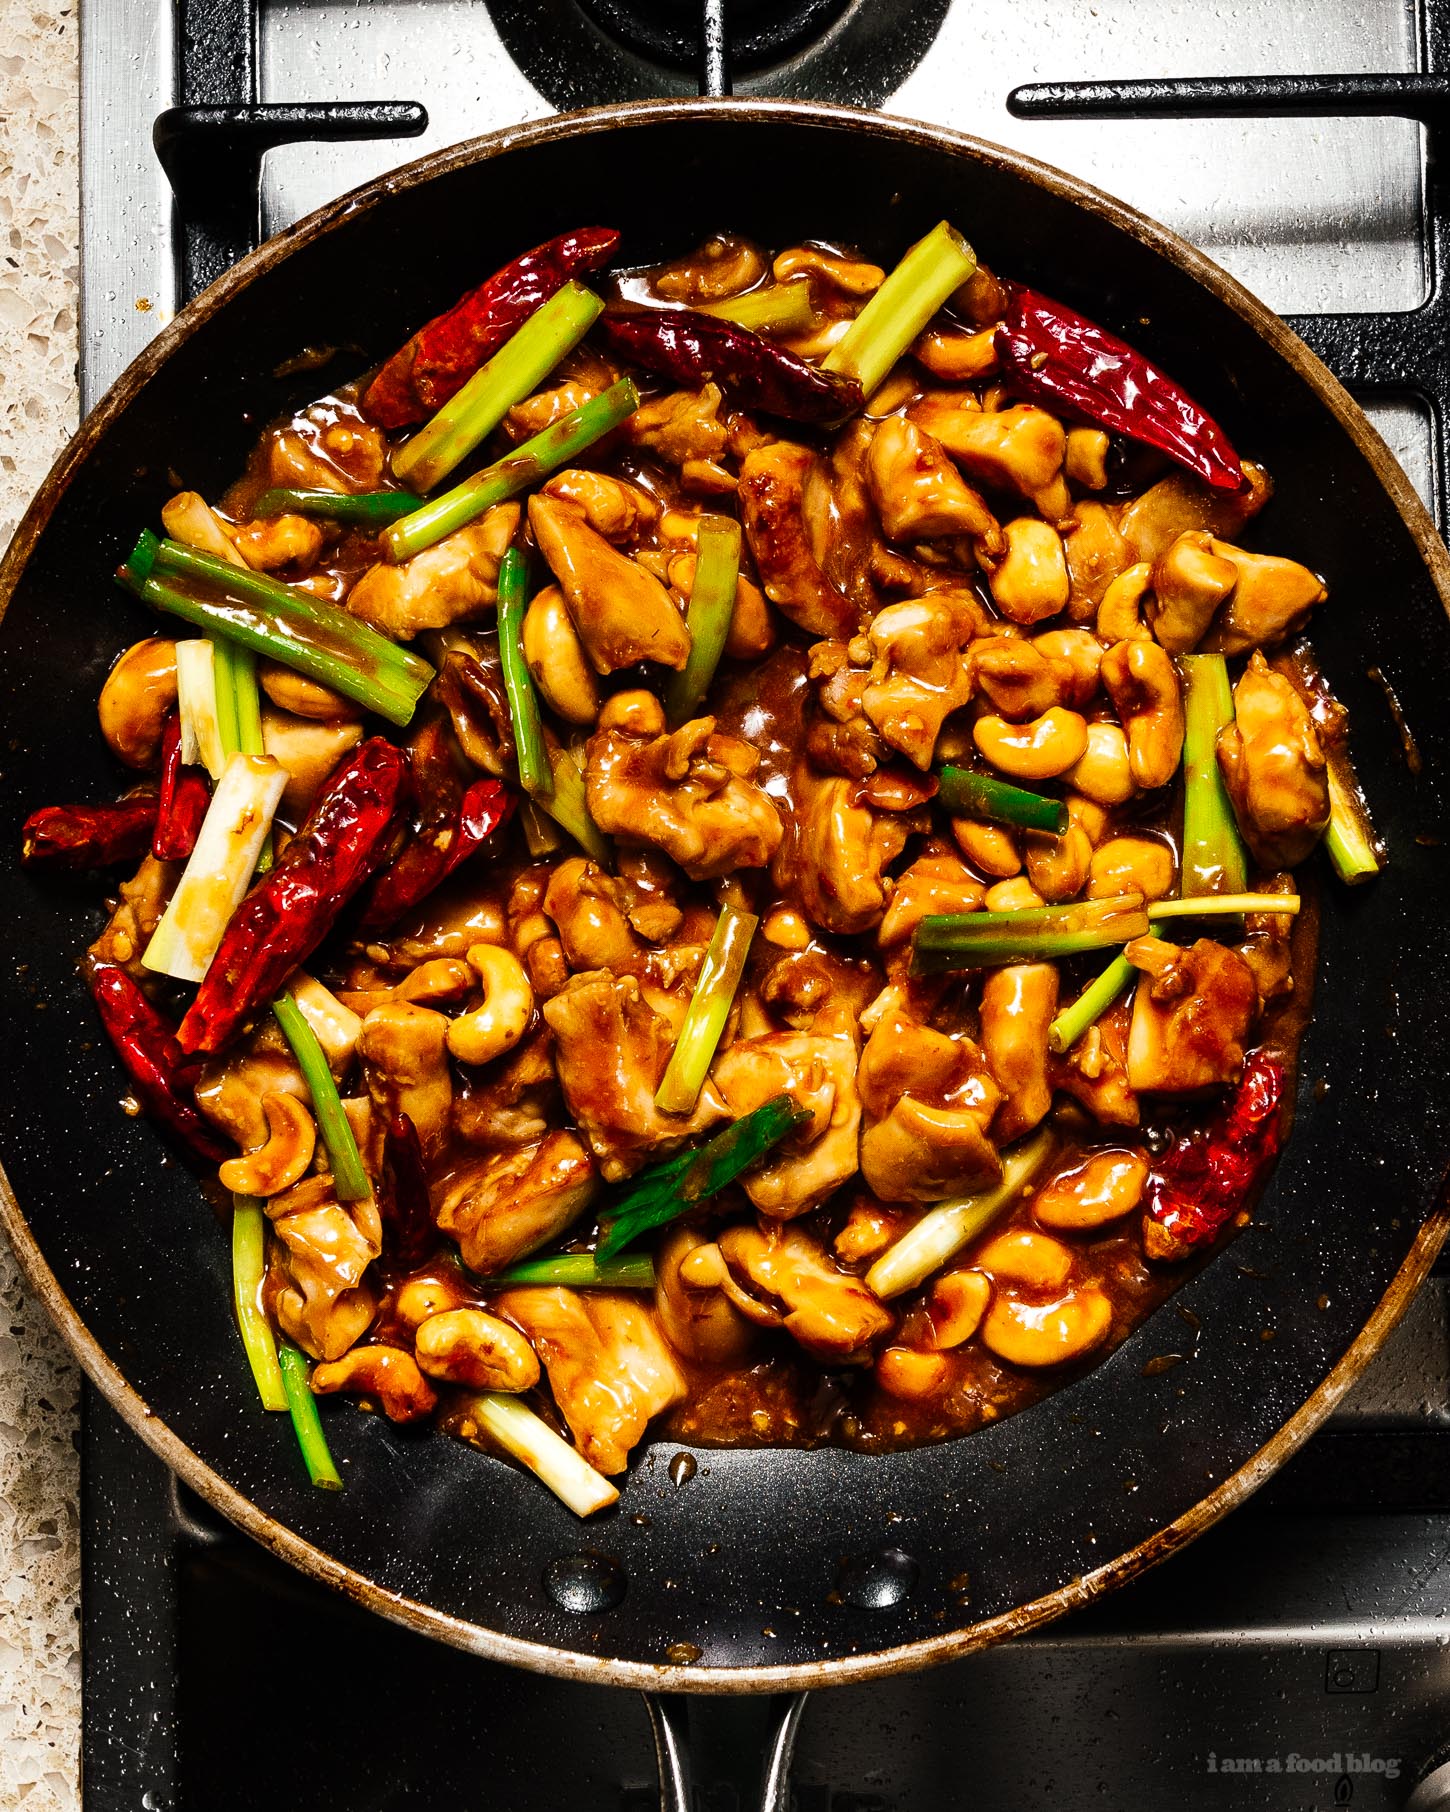 This spicy, tangy, sweet, and addictive better than takeout no peanut kung pao chicken stir fry recipe is here to brighten up your weeknight (or weekend) dinners! Highly addictive and super easy to make at home. #recipe #recipes #dinner #kungpao #kungpaorecipe #kungpaochicken #kungpaochickenrecipe #takeout #takeoutrecipes #betterthantakeout #stirfry #stirfryrecipes